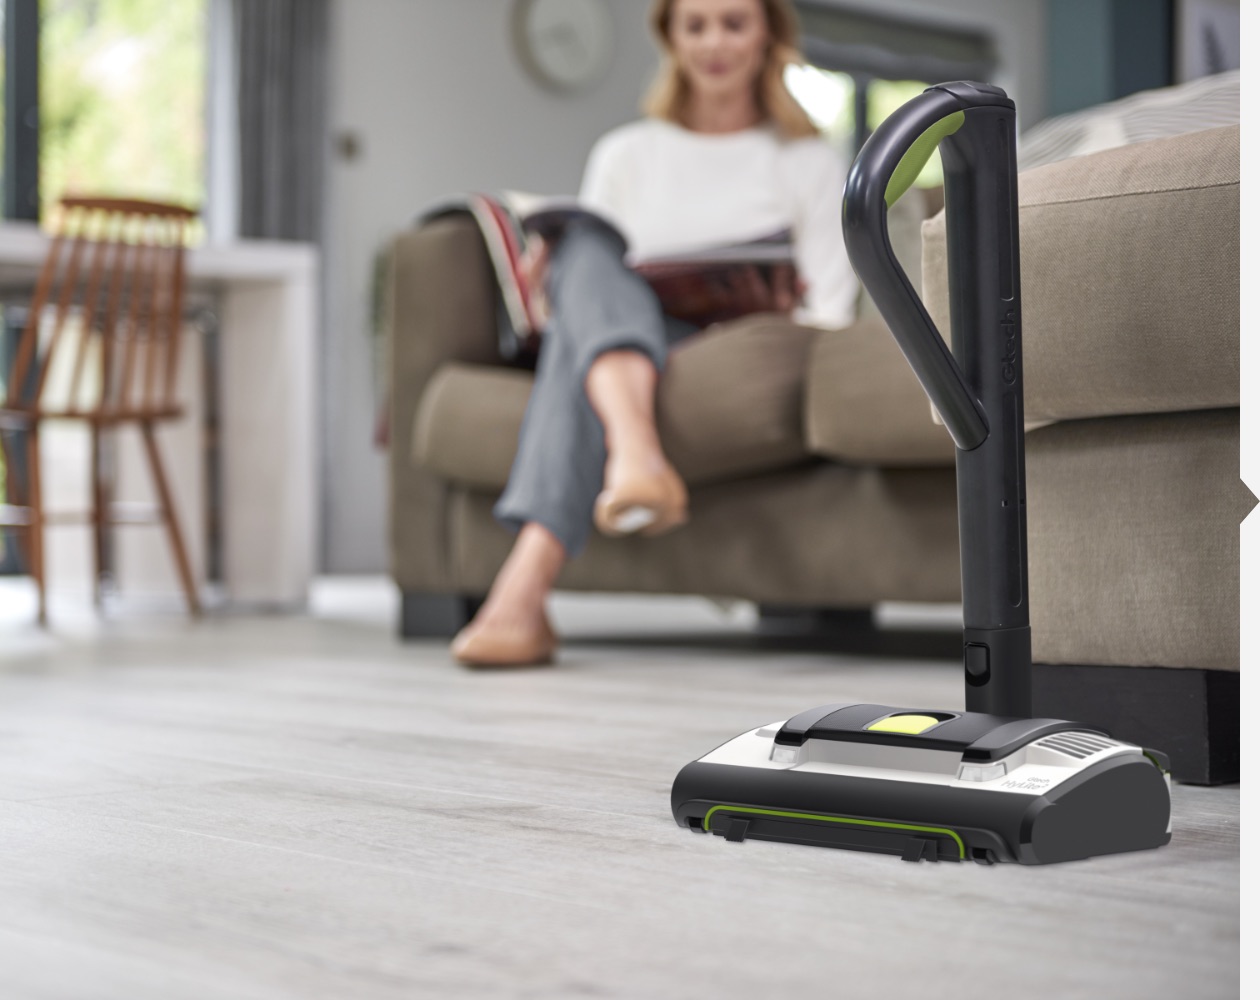 HyLite 2 small vacuum cleaner